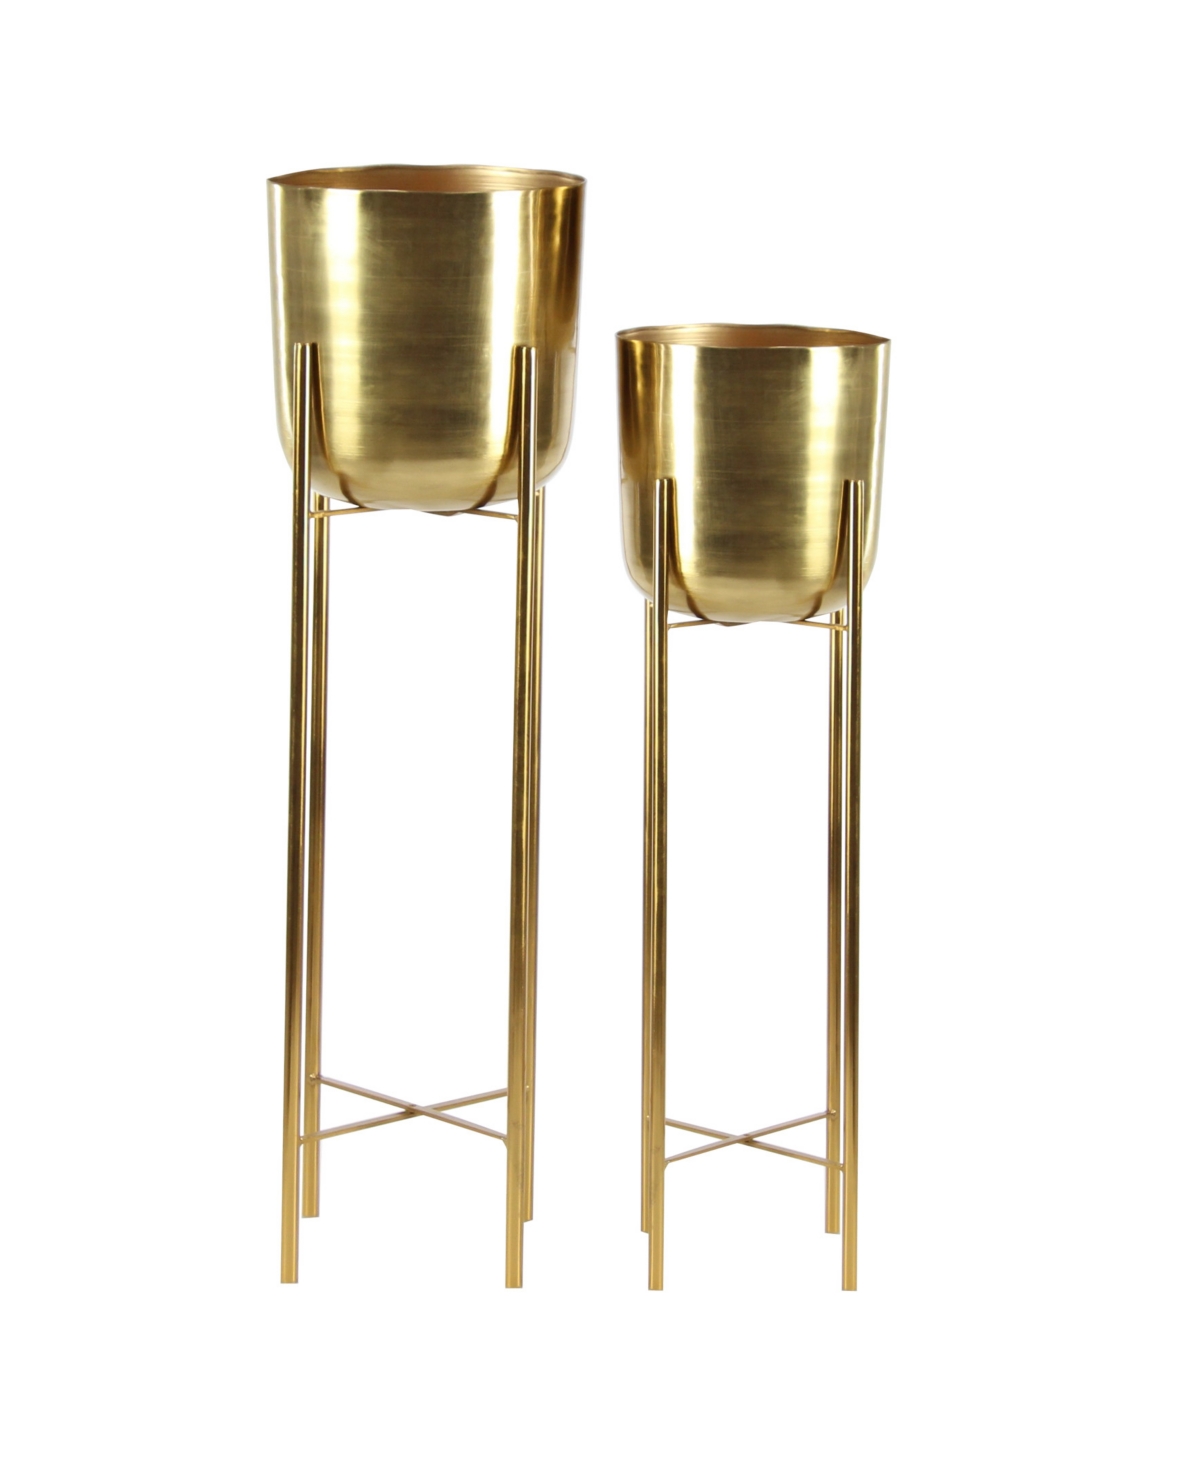 by Cosmopolitan Set of 2 Gold Metal Glam Planter, 39", 46" - Gold-tone